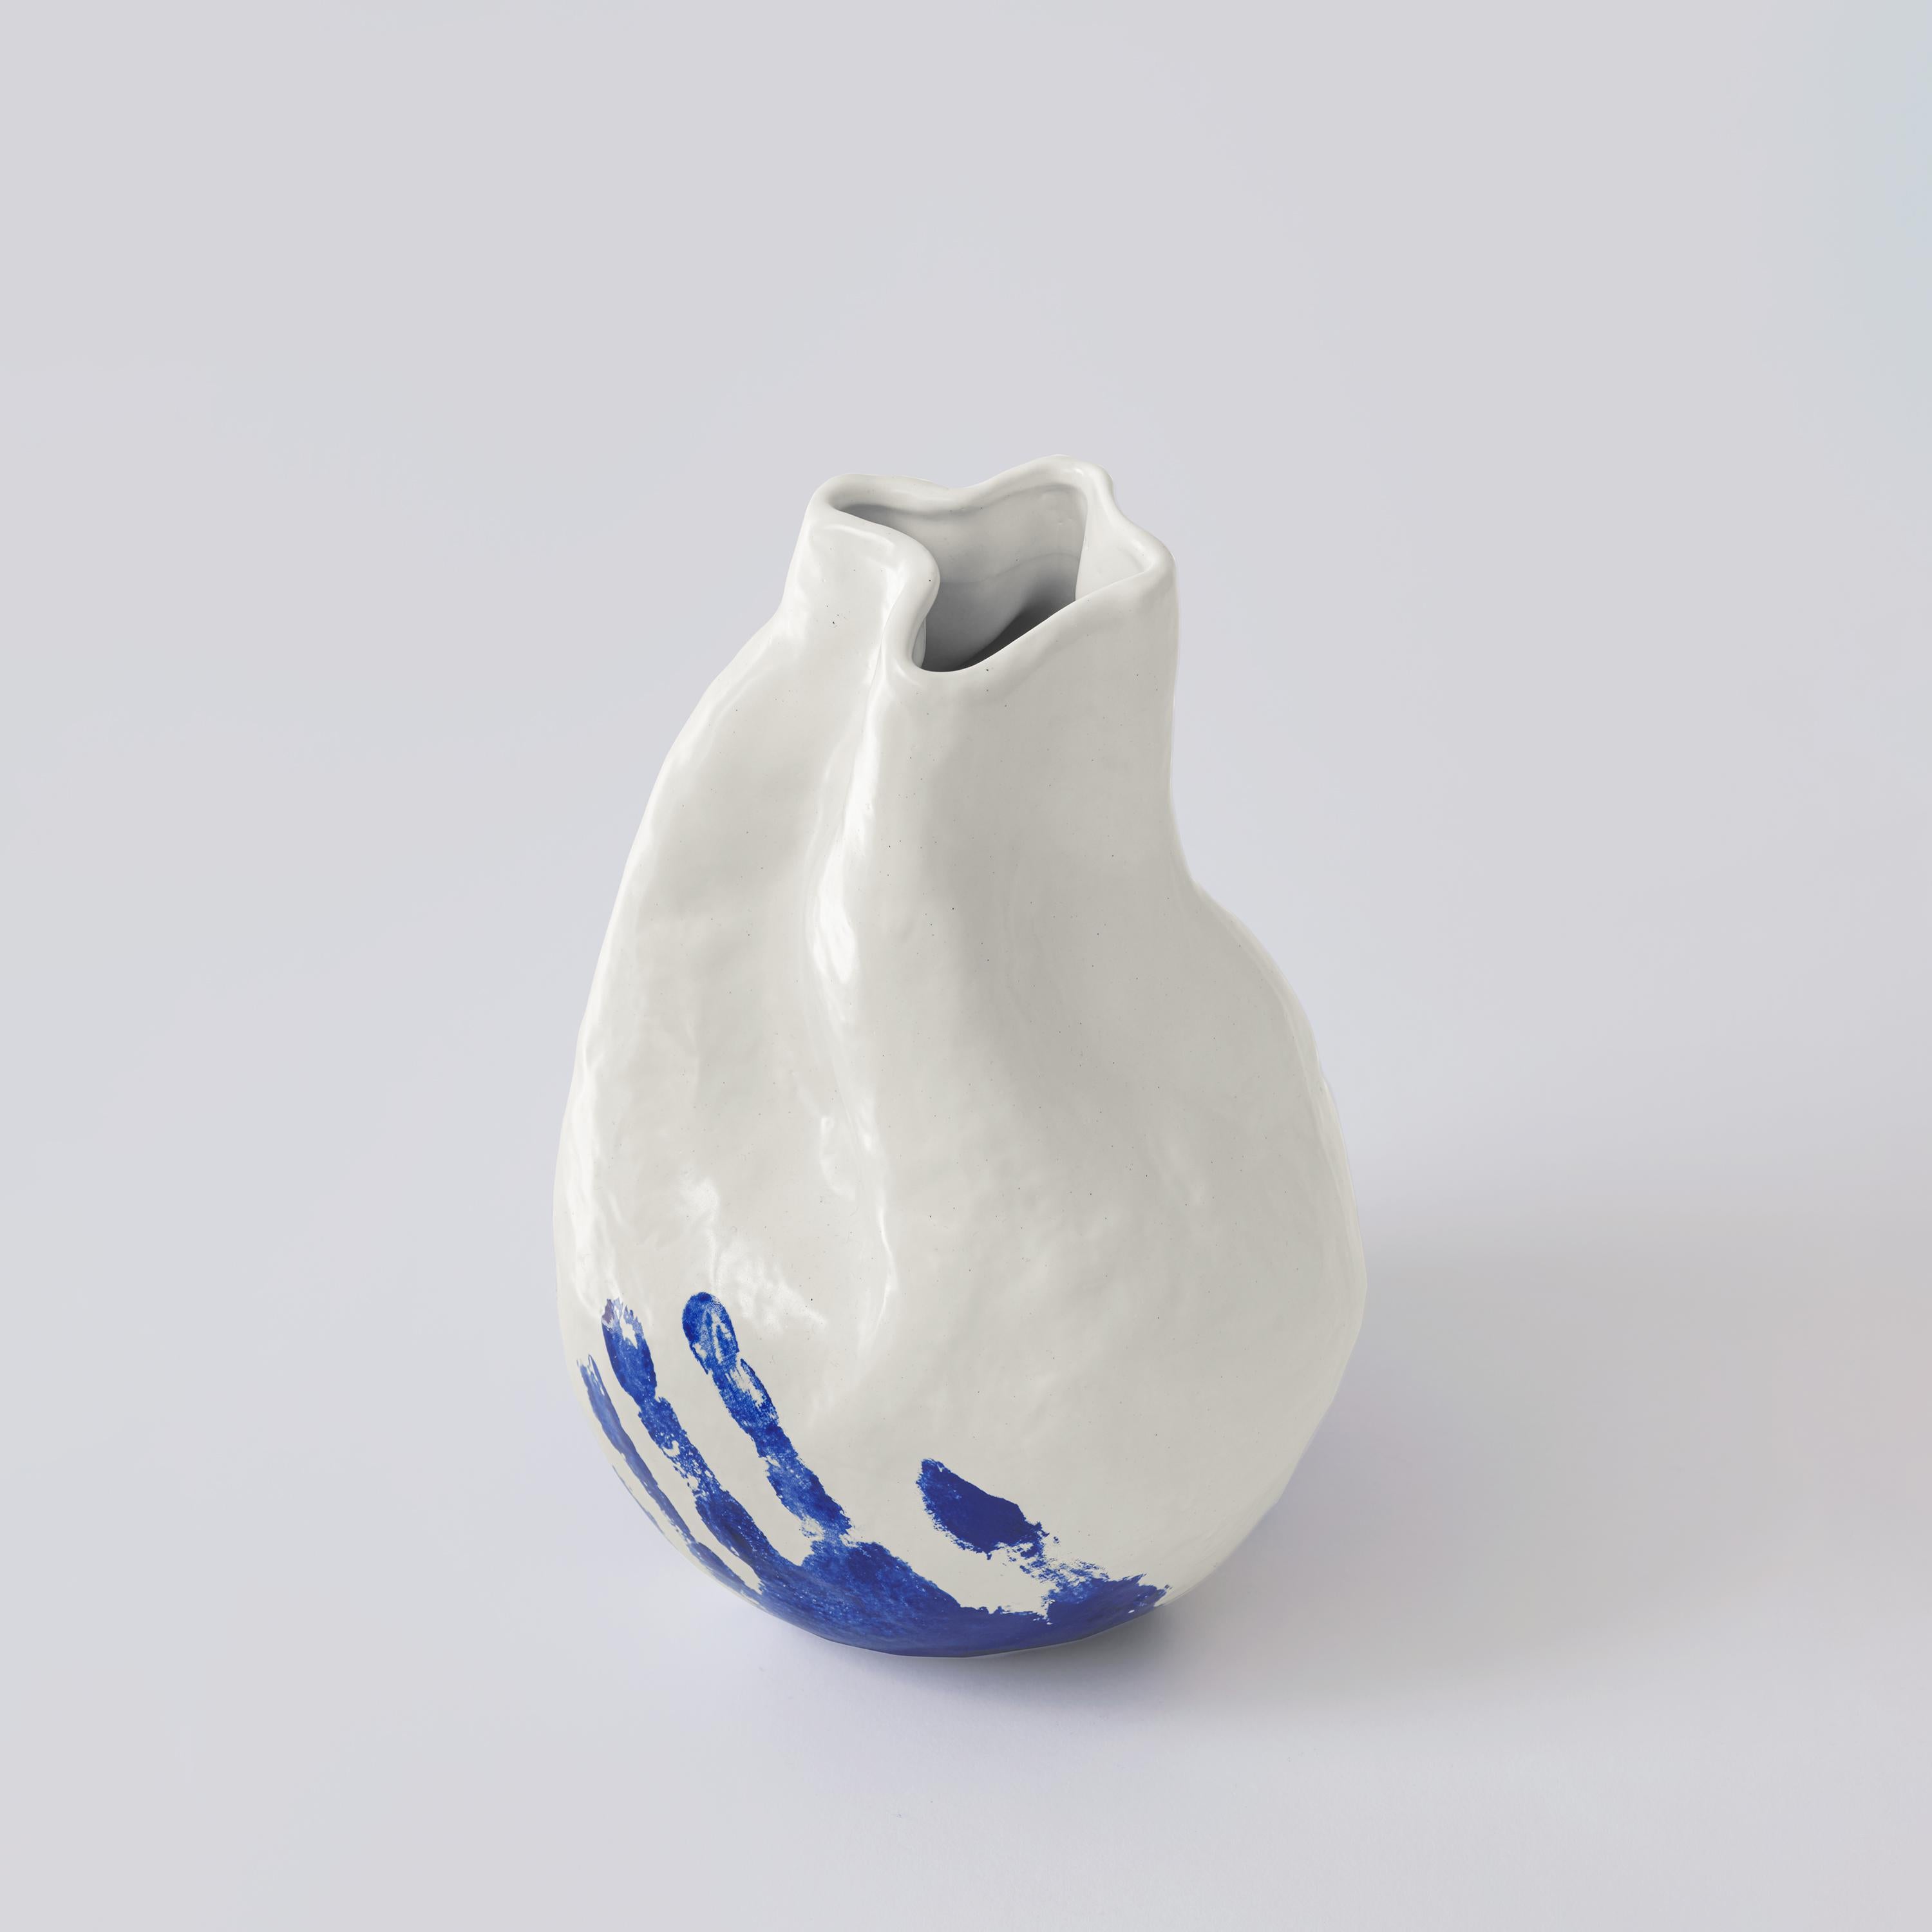 This porcelain hand-crafted vase from The Vibrant Touch Collection presents a tactile interplay of textures, with a glossy white finish that contrasts with a bold blue handprint at its base. The organic form of the vase, free from conventional